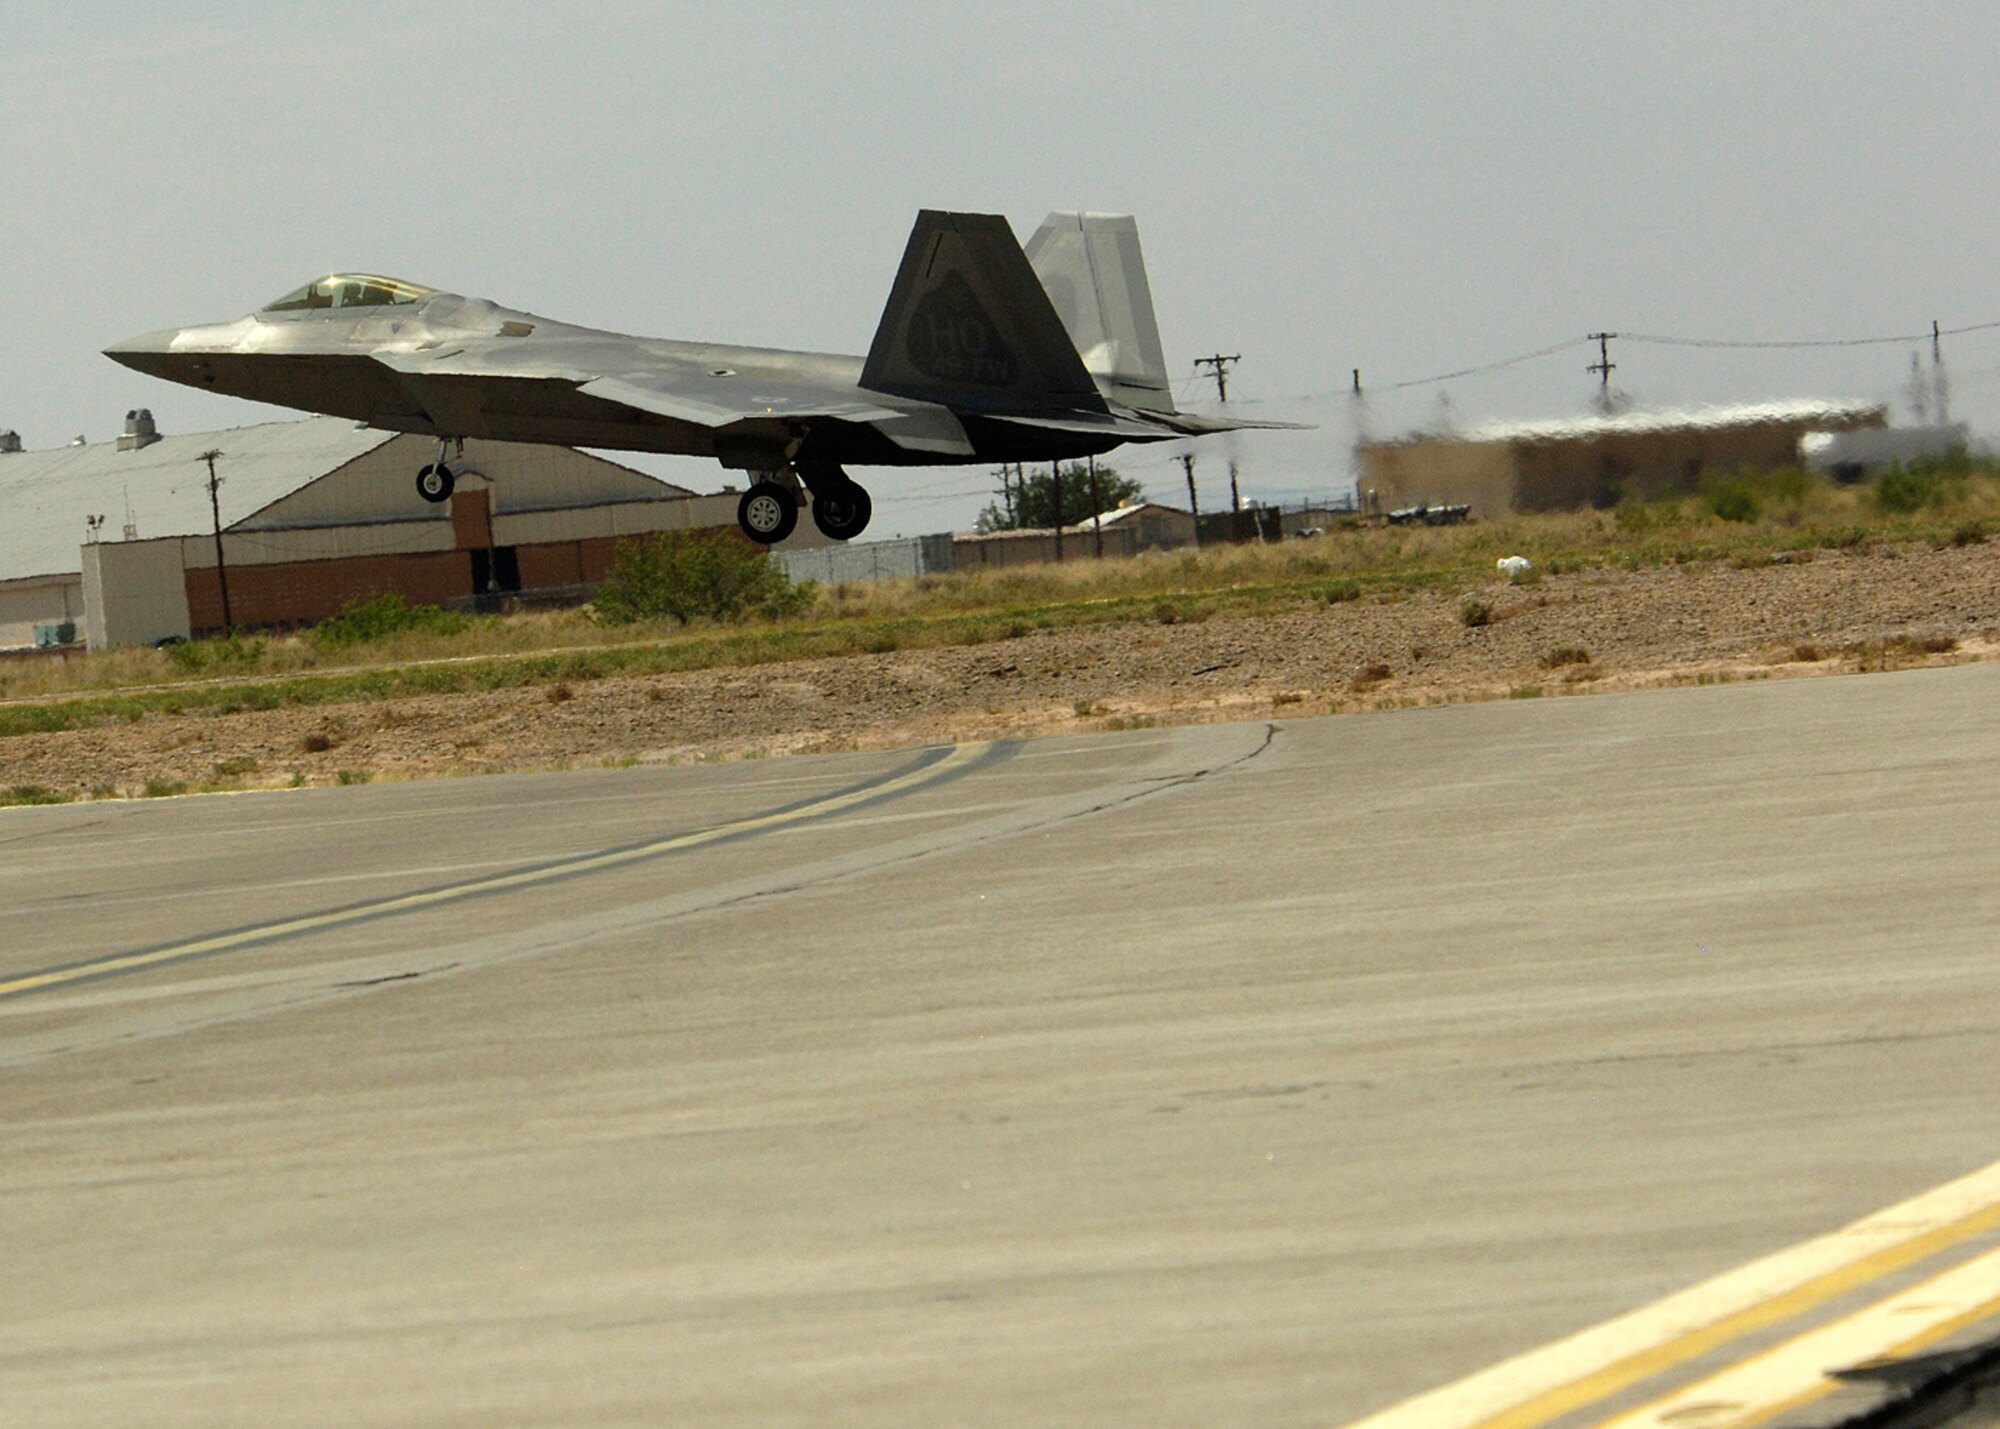 One of two F-22A Raptors land at Holloman Air Force Base, N.M., June 2. The jets flew over the Tularosa Basin prior to landing at Holloman giving the community a chance to witness the future of Holloman. (U.S. Air Force photo/Airman 1st Class Michael Means)